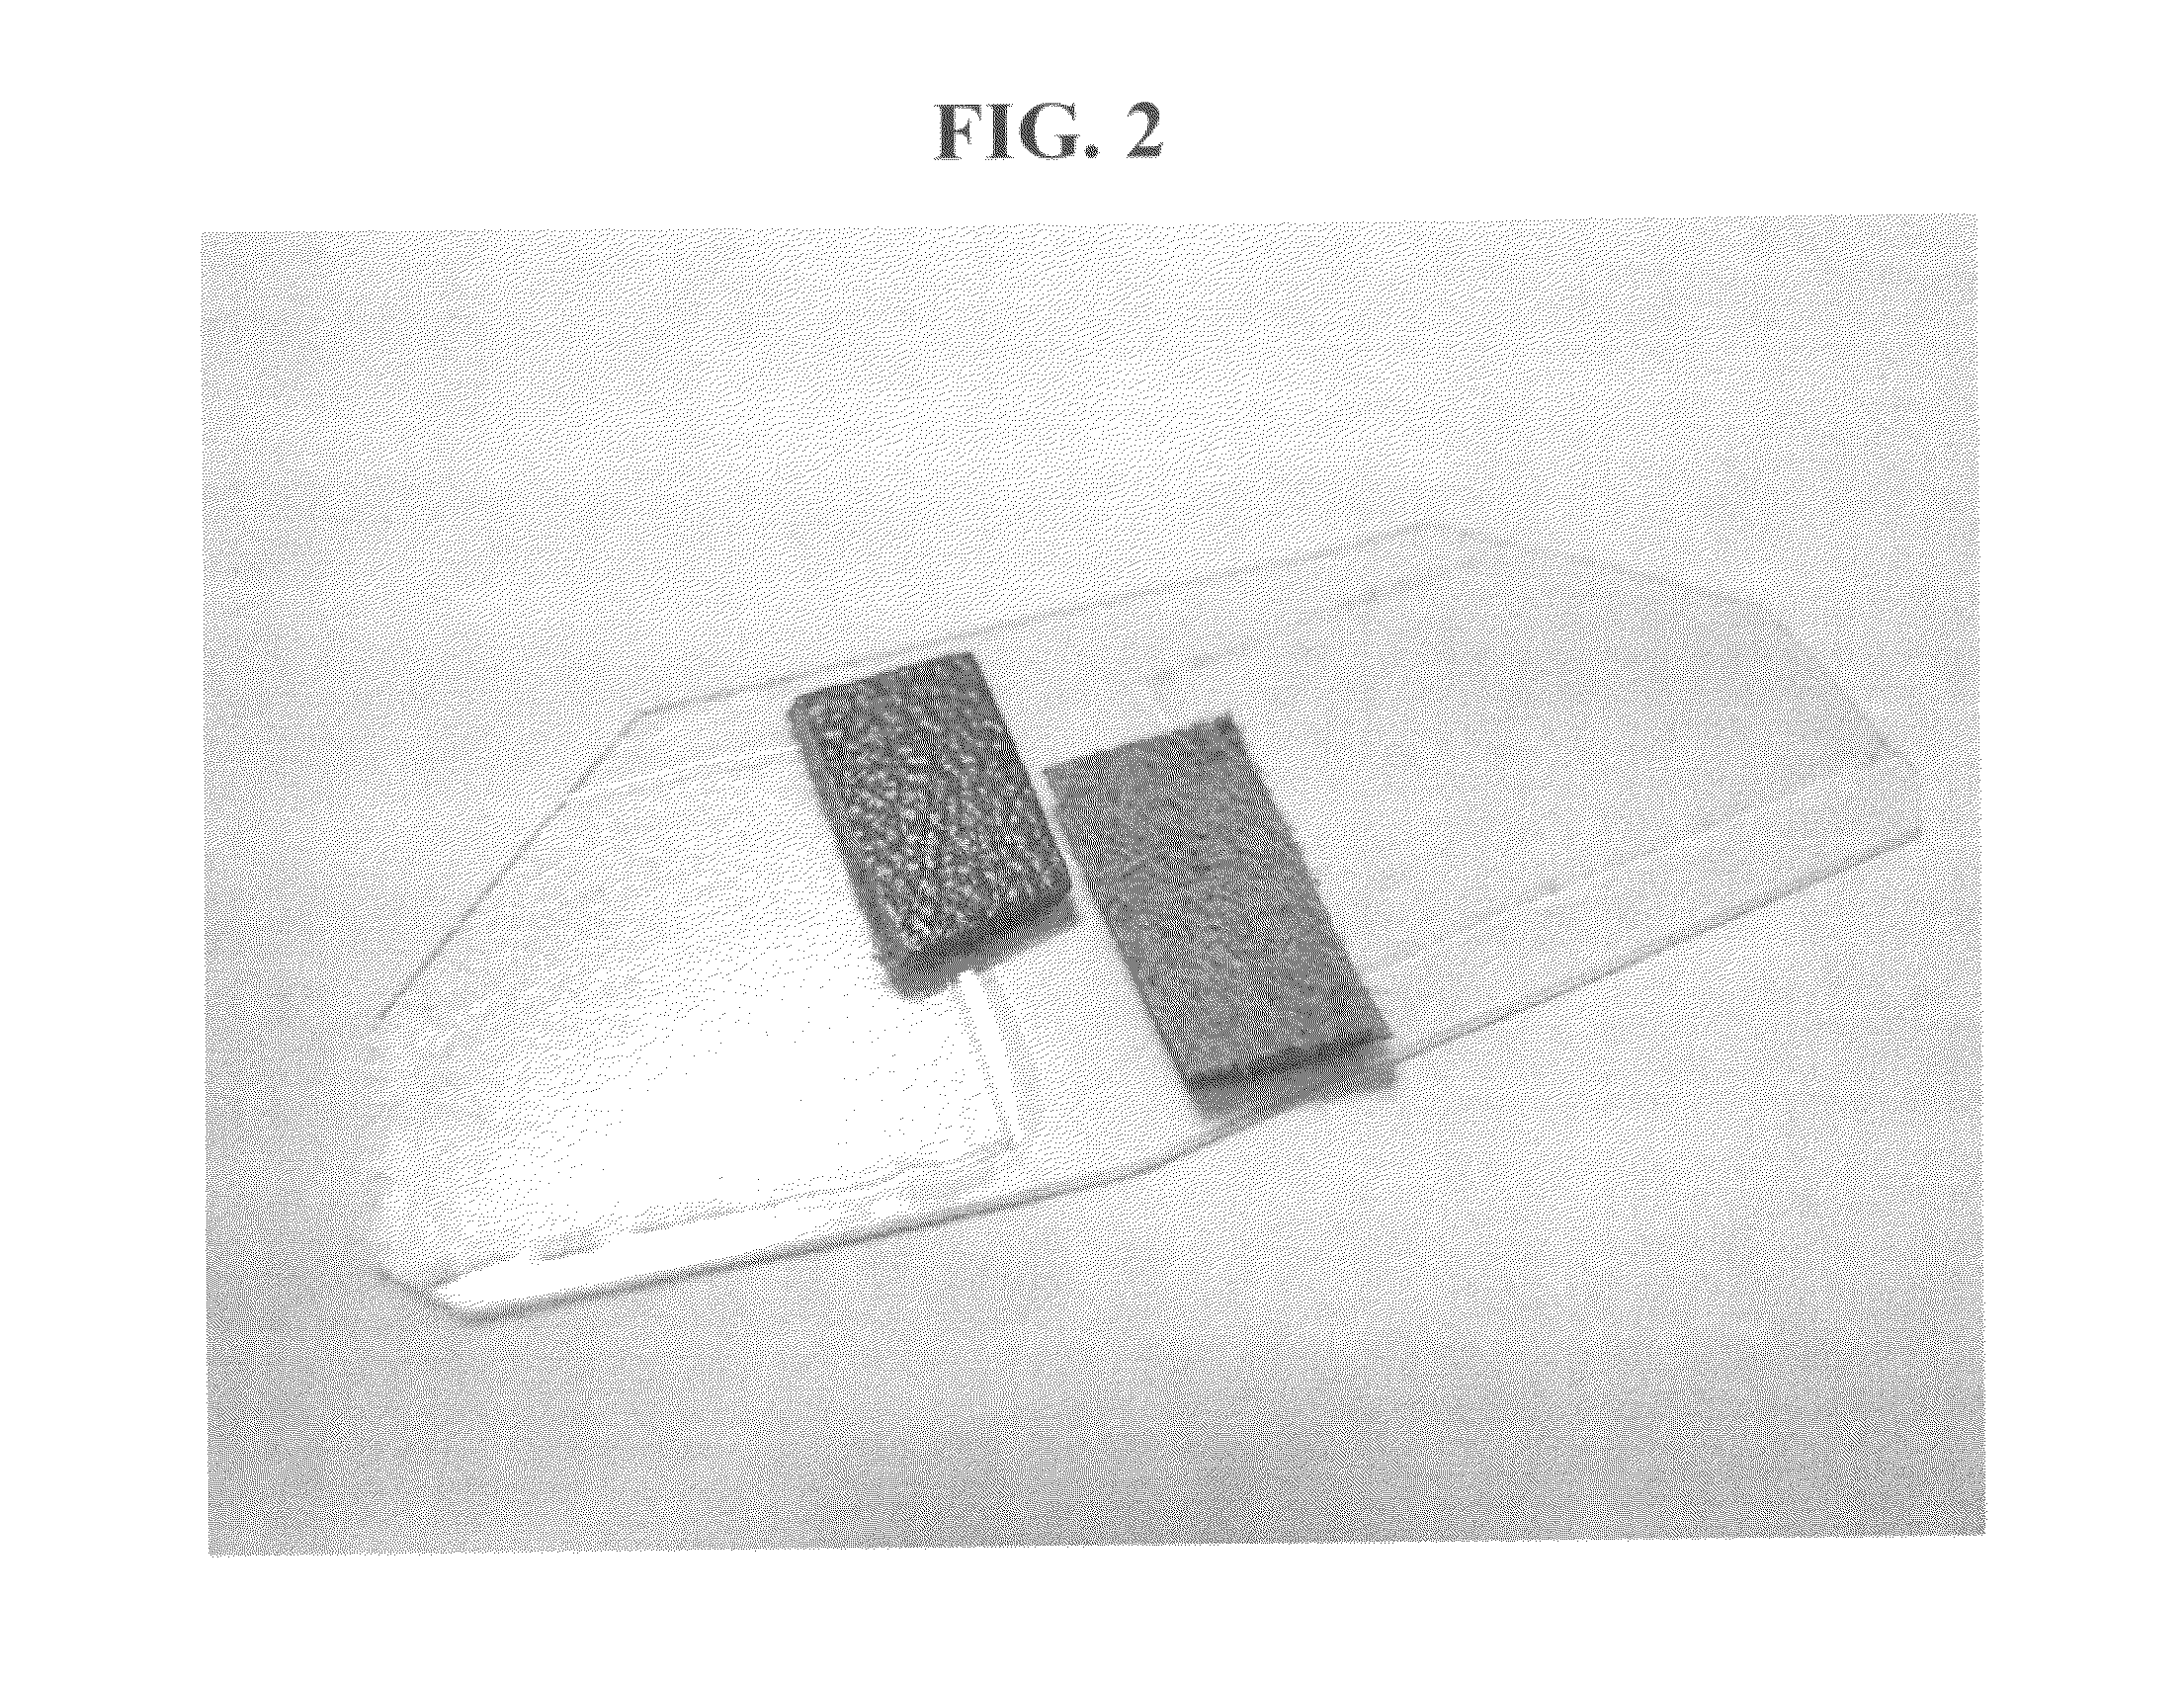 Method of duplicating texture pattern on object's surface by NANO imprinting and electroforming and patterned duplication panel using the same